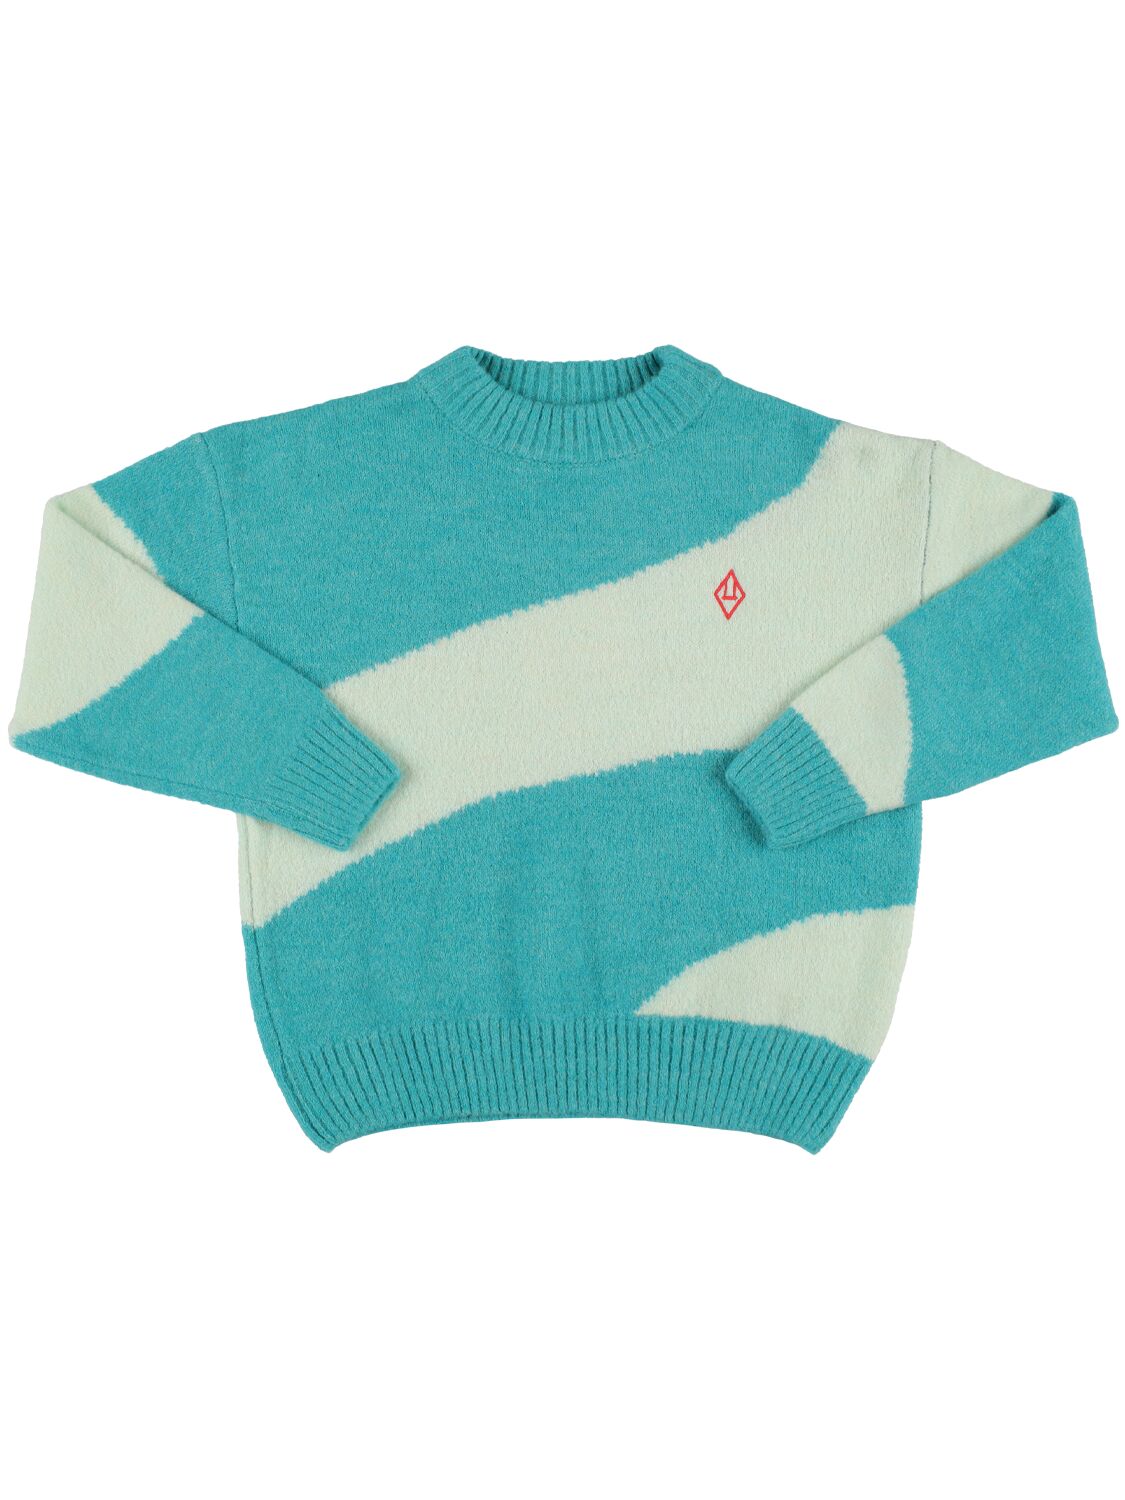 The Animals Observatory Kids' Acrylic Blend Knit Sweater In Light Blue